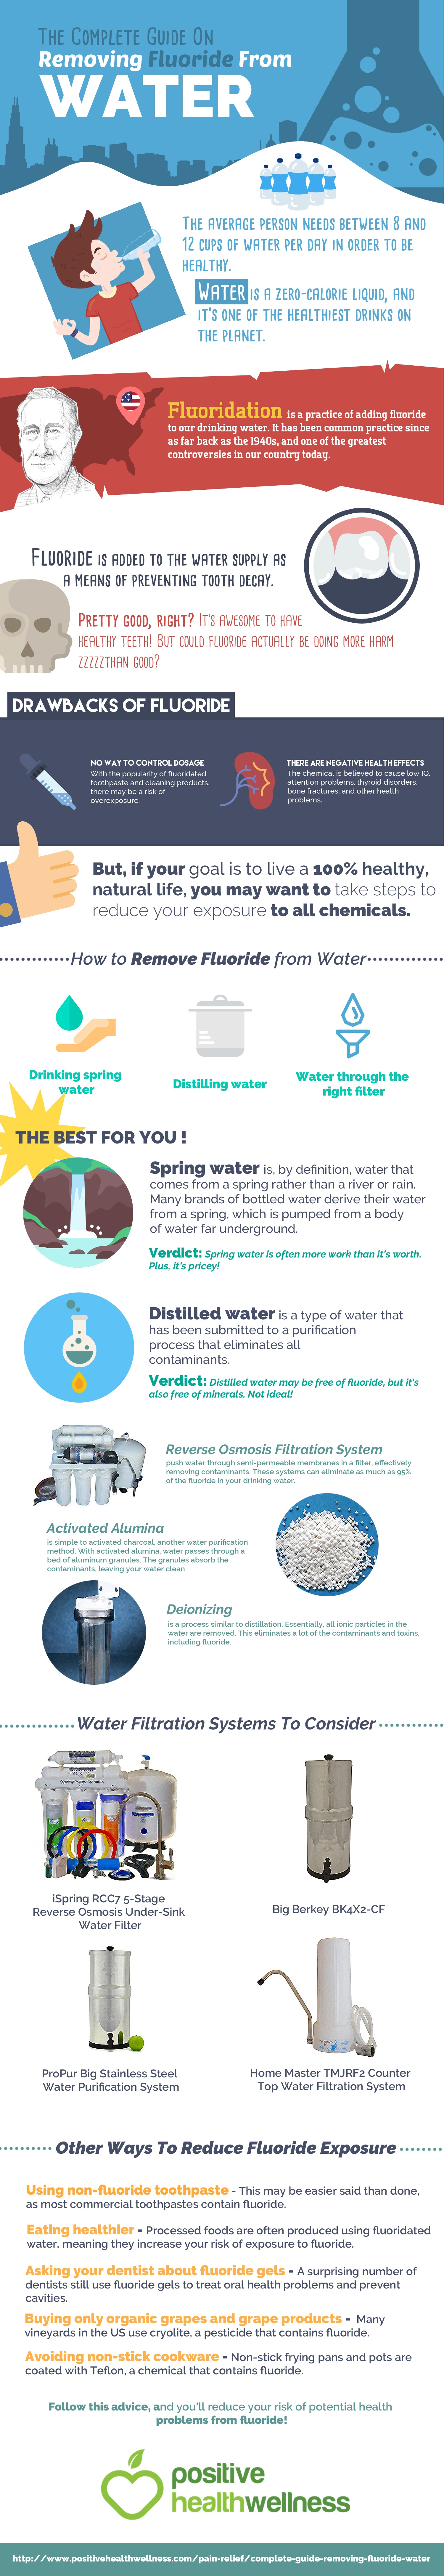 The Complete Guide On Removing Fluoride From Water (Infographic)